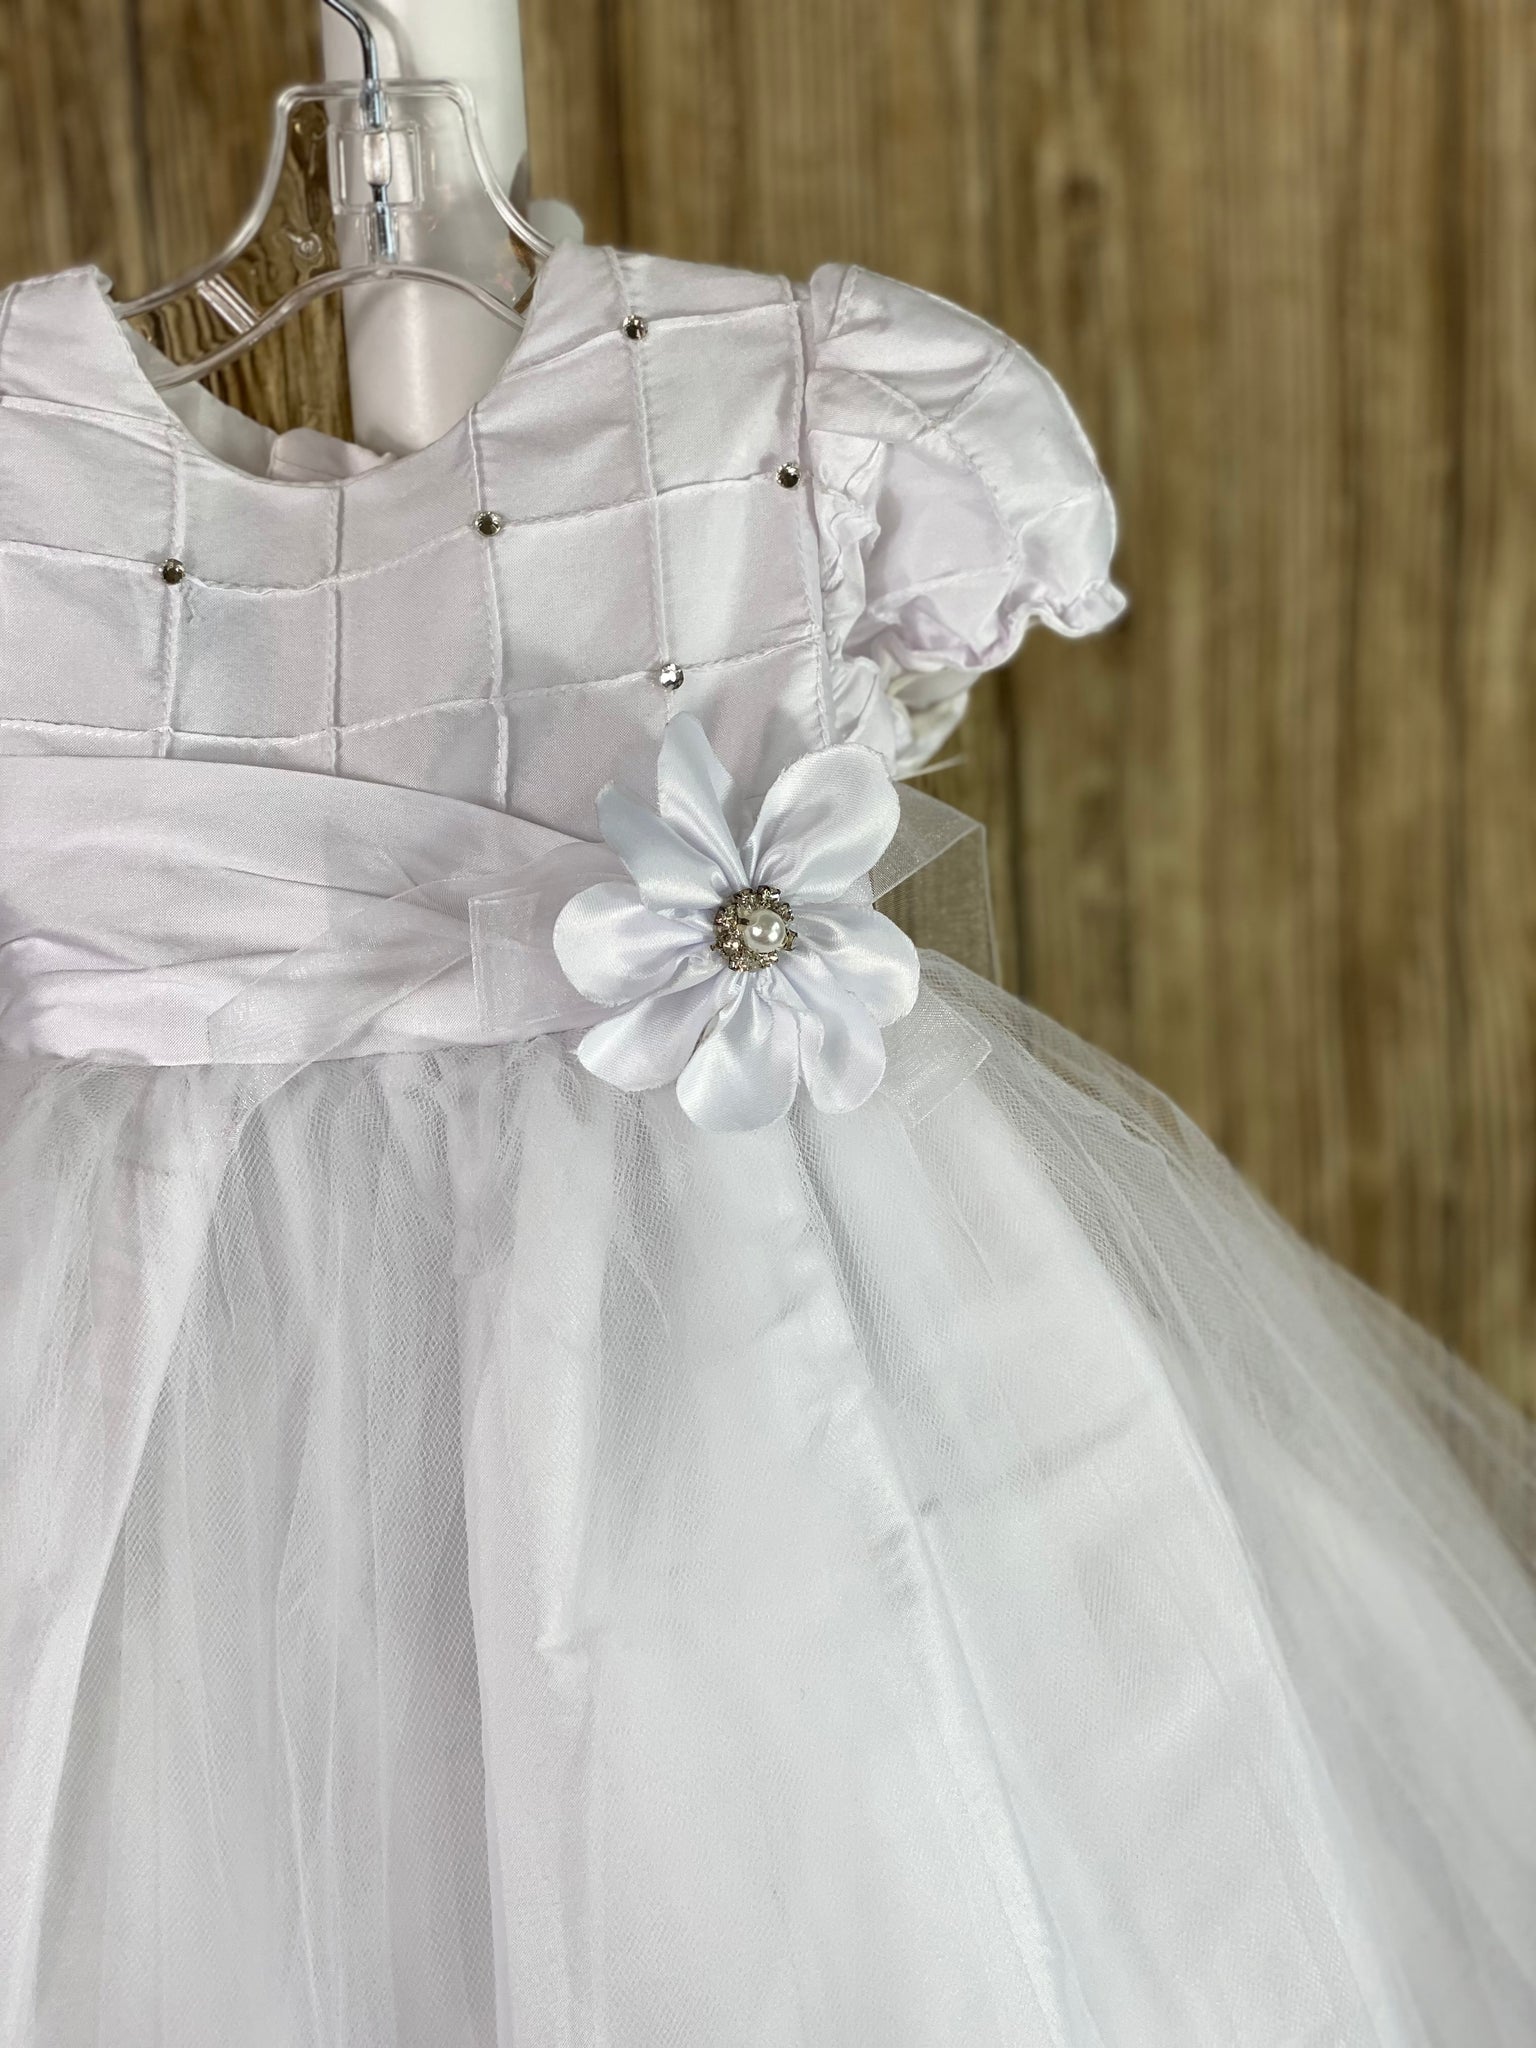 This a beautiful, one-of-a-kind baptism gown.  A lovely gown for a precious child.  White, size 12M Cubed satin bodice with rhinestones Satin cubed sleeves Satin belt with flower Tulle skirting with satin underlay Satin bow in back Button closure